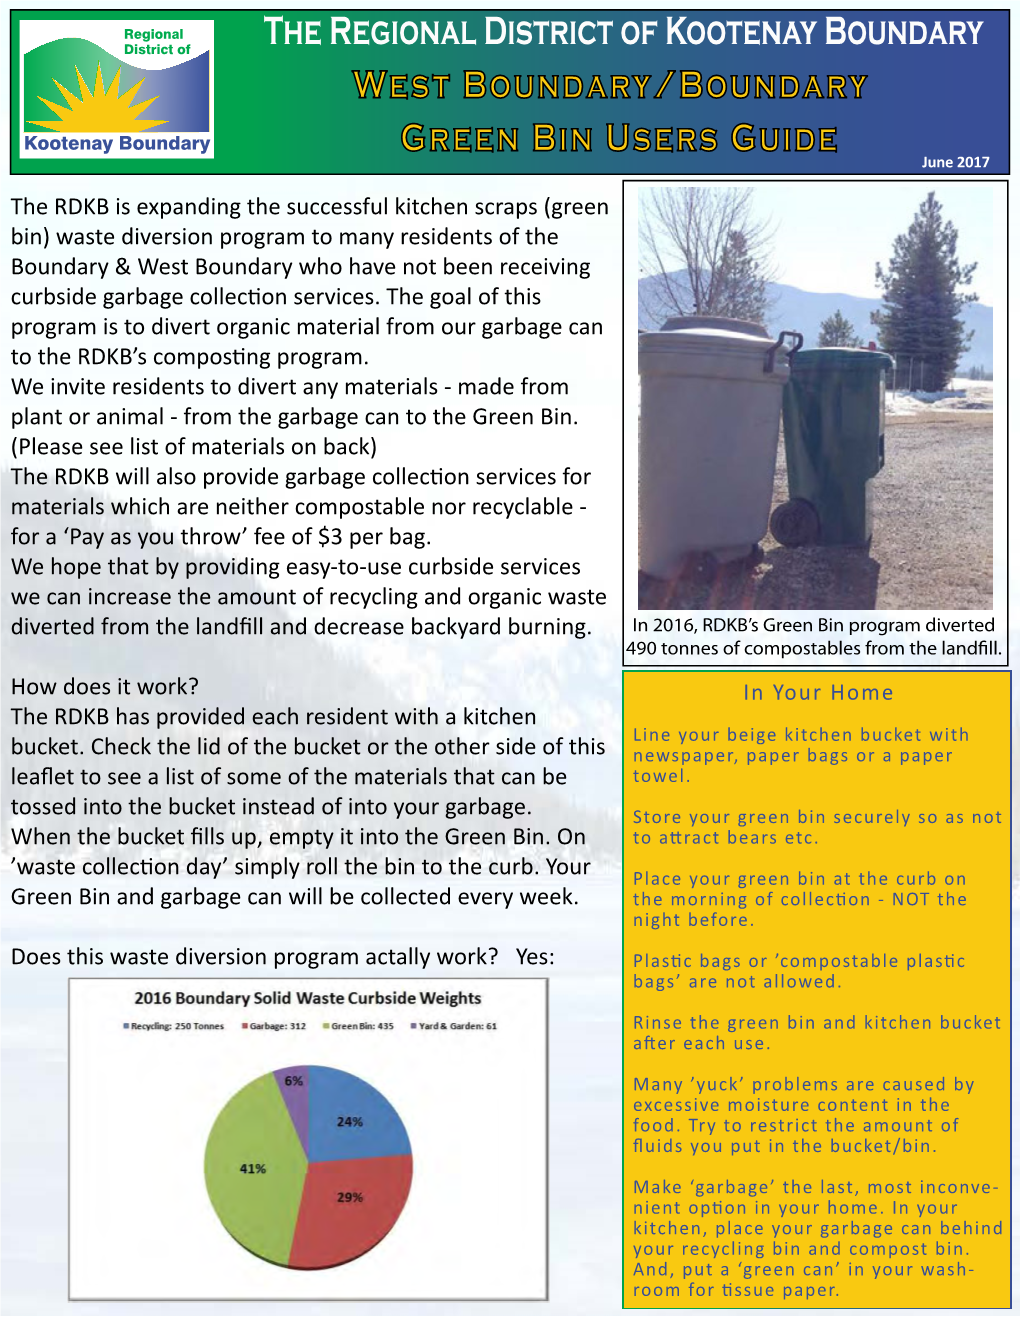 Check out the Green Bin User Guide